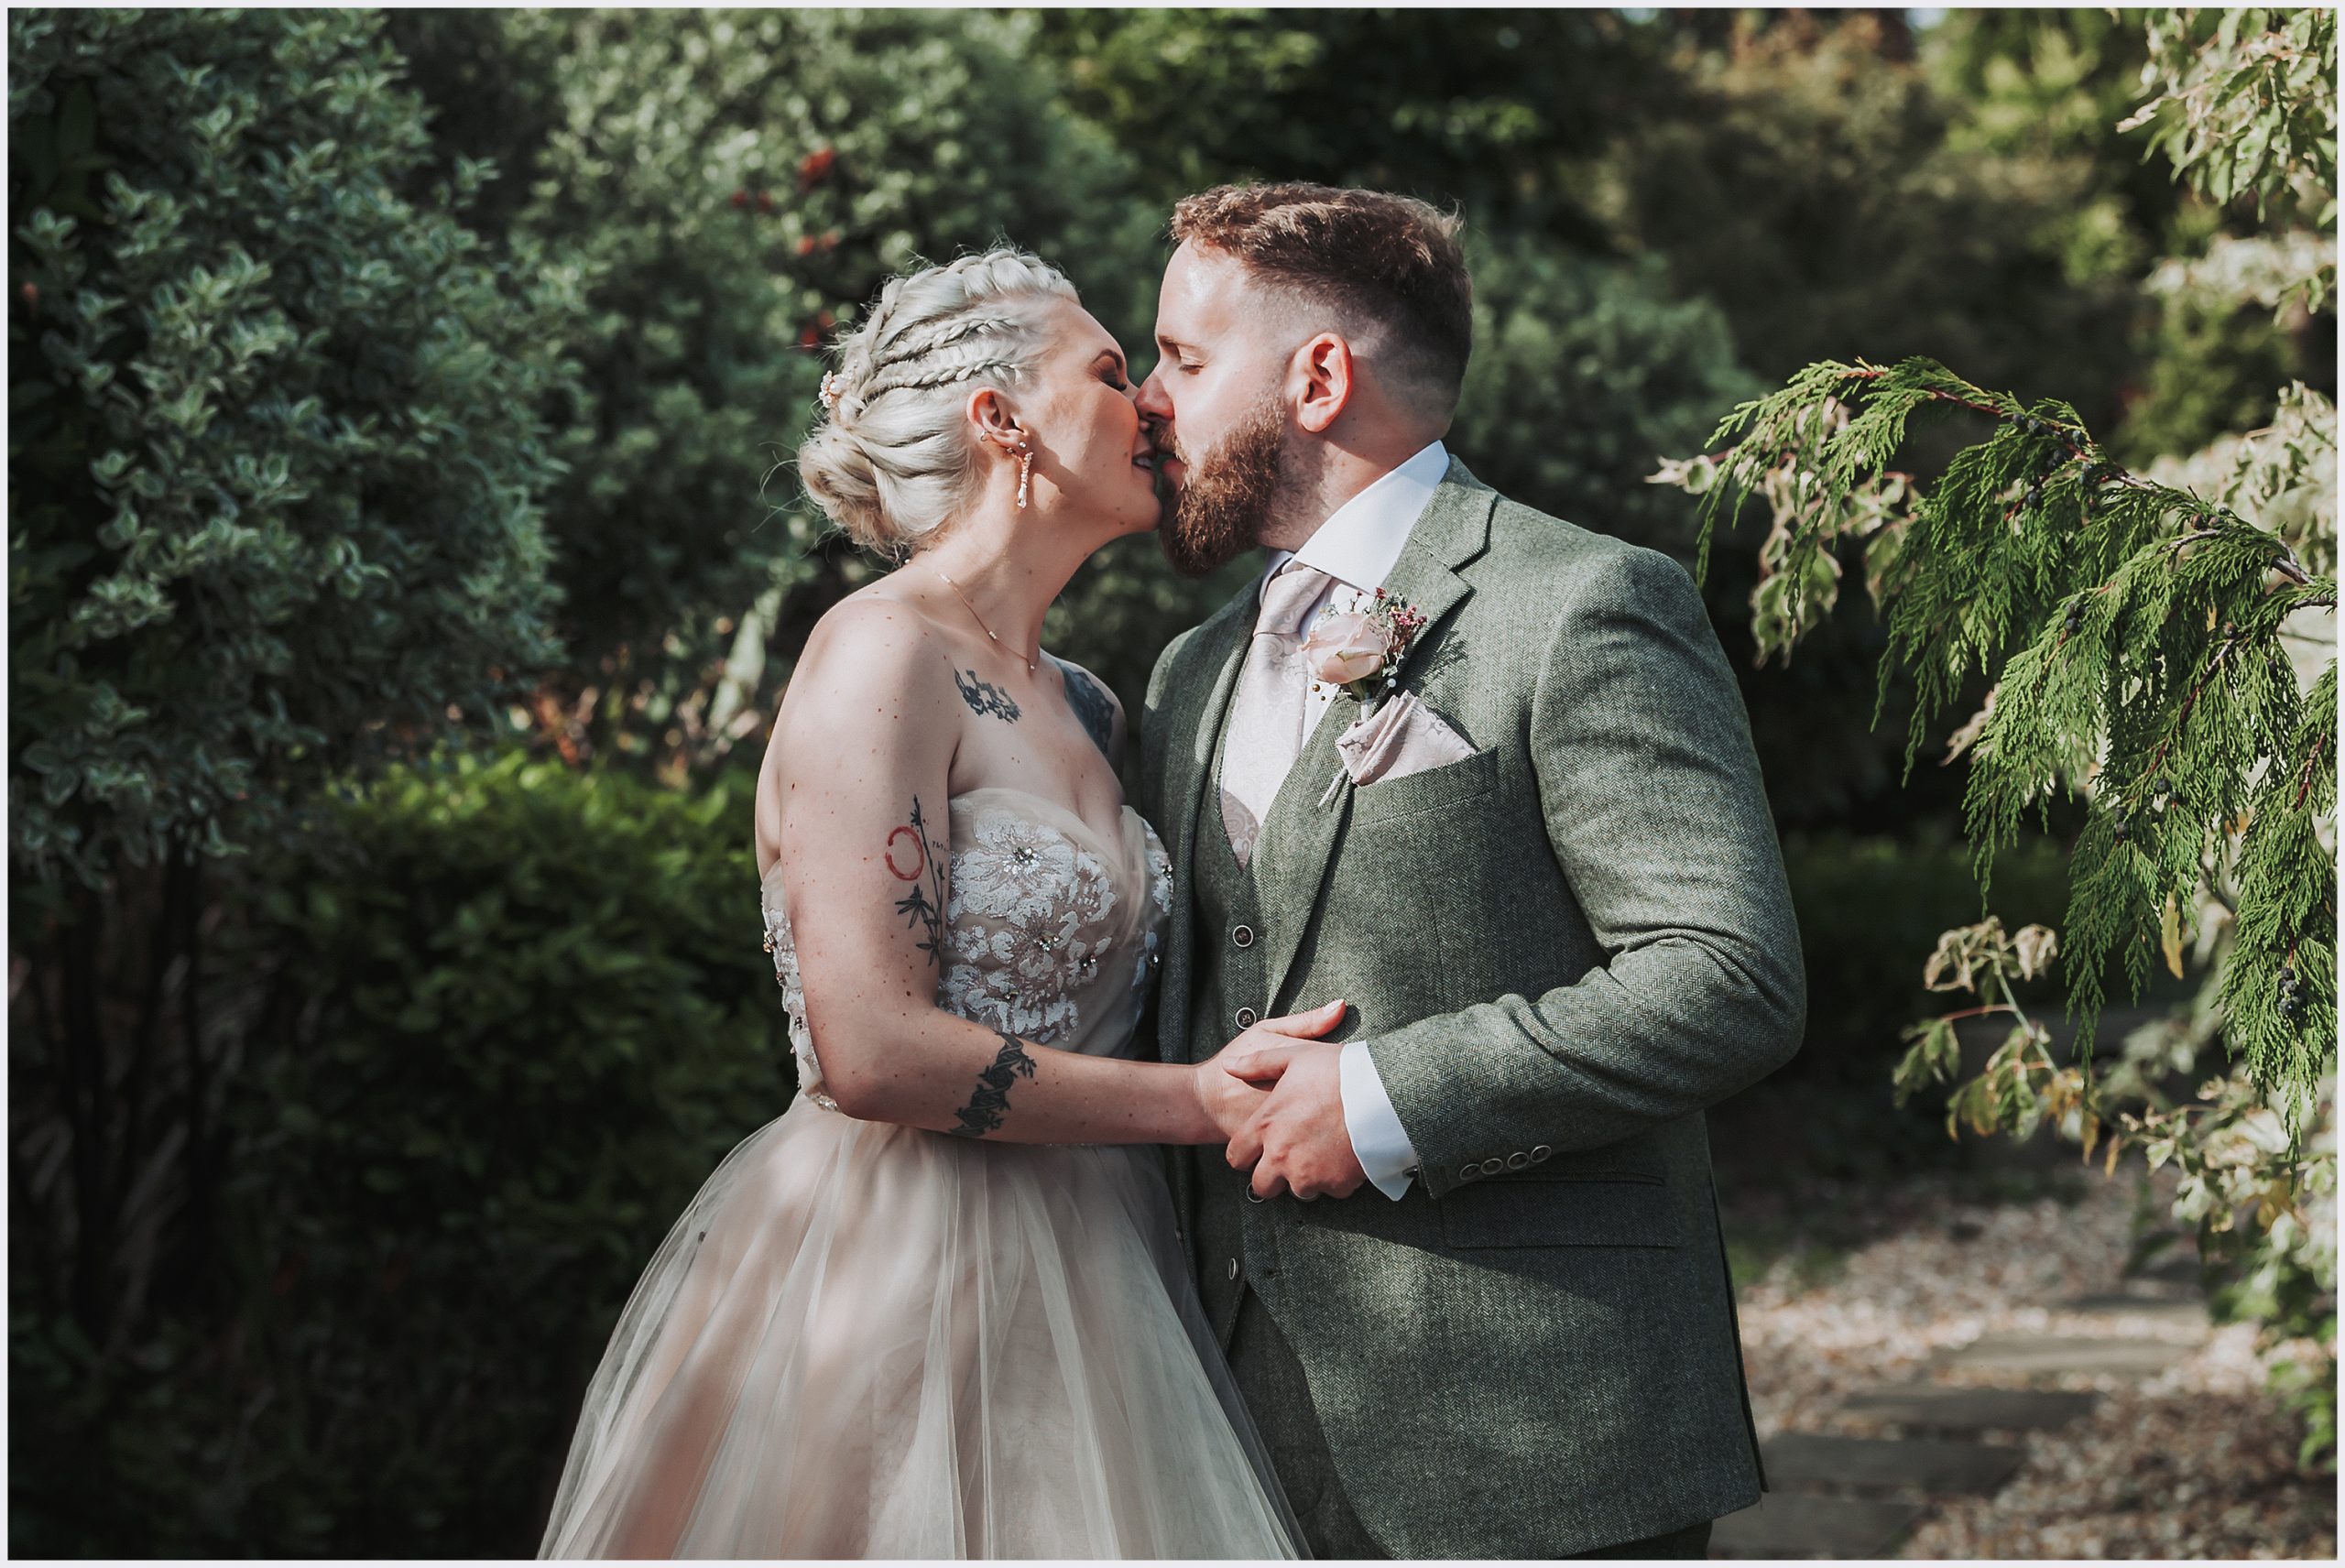 Capturing North Wales' Wedding Splendor: Bride and Groom's Intimate Portrait.  A bride and groom share a kiss at The Grosvenor Pulford Hotel and Spa